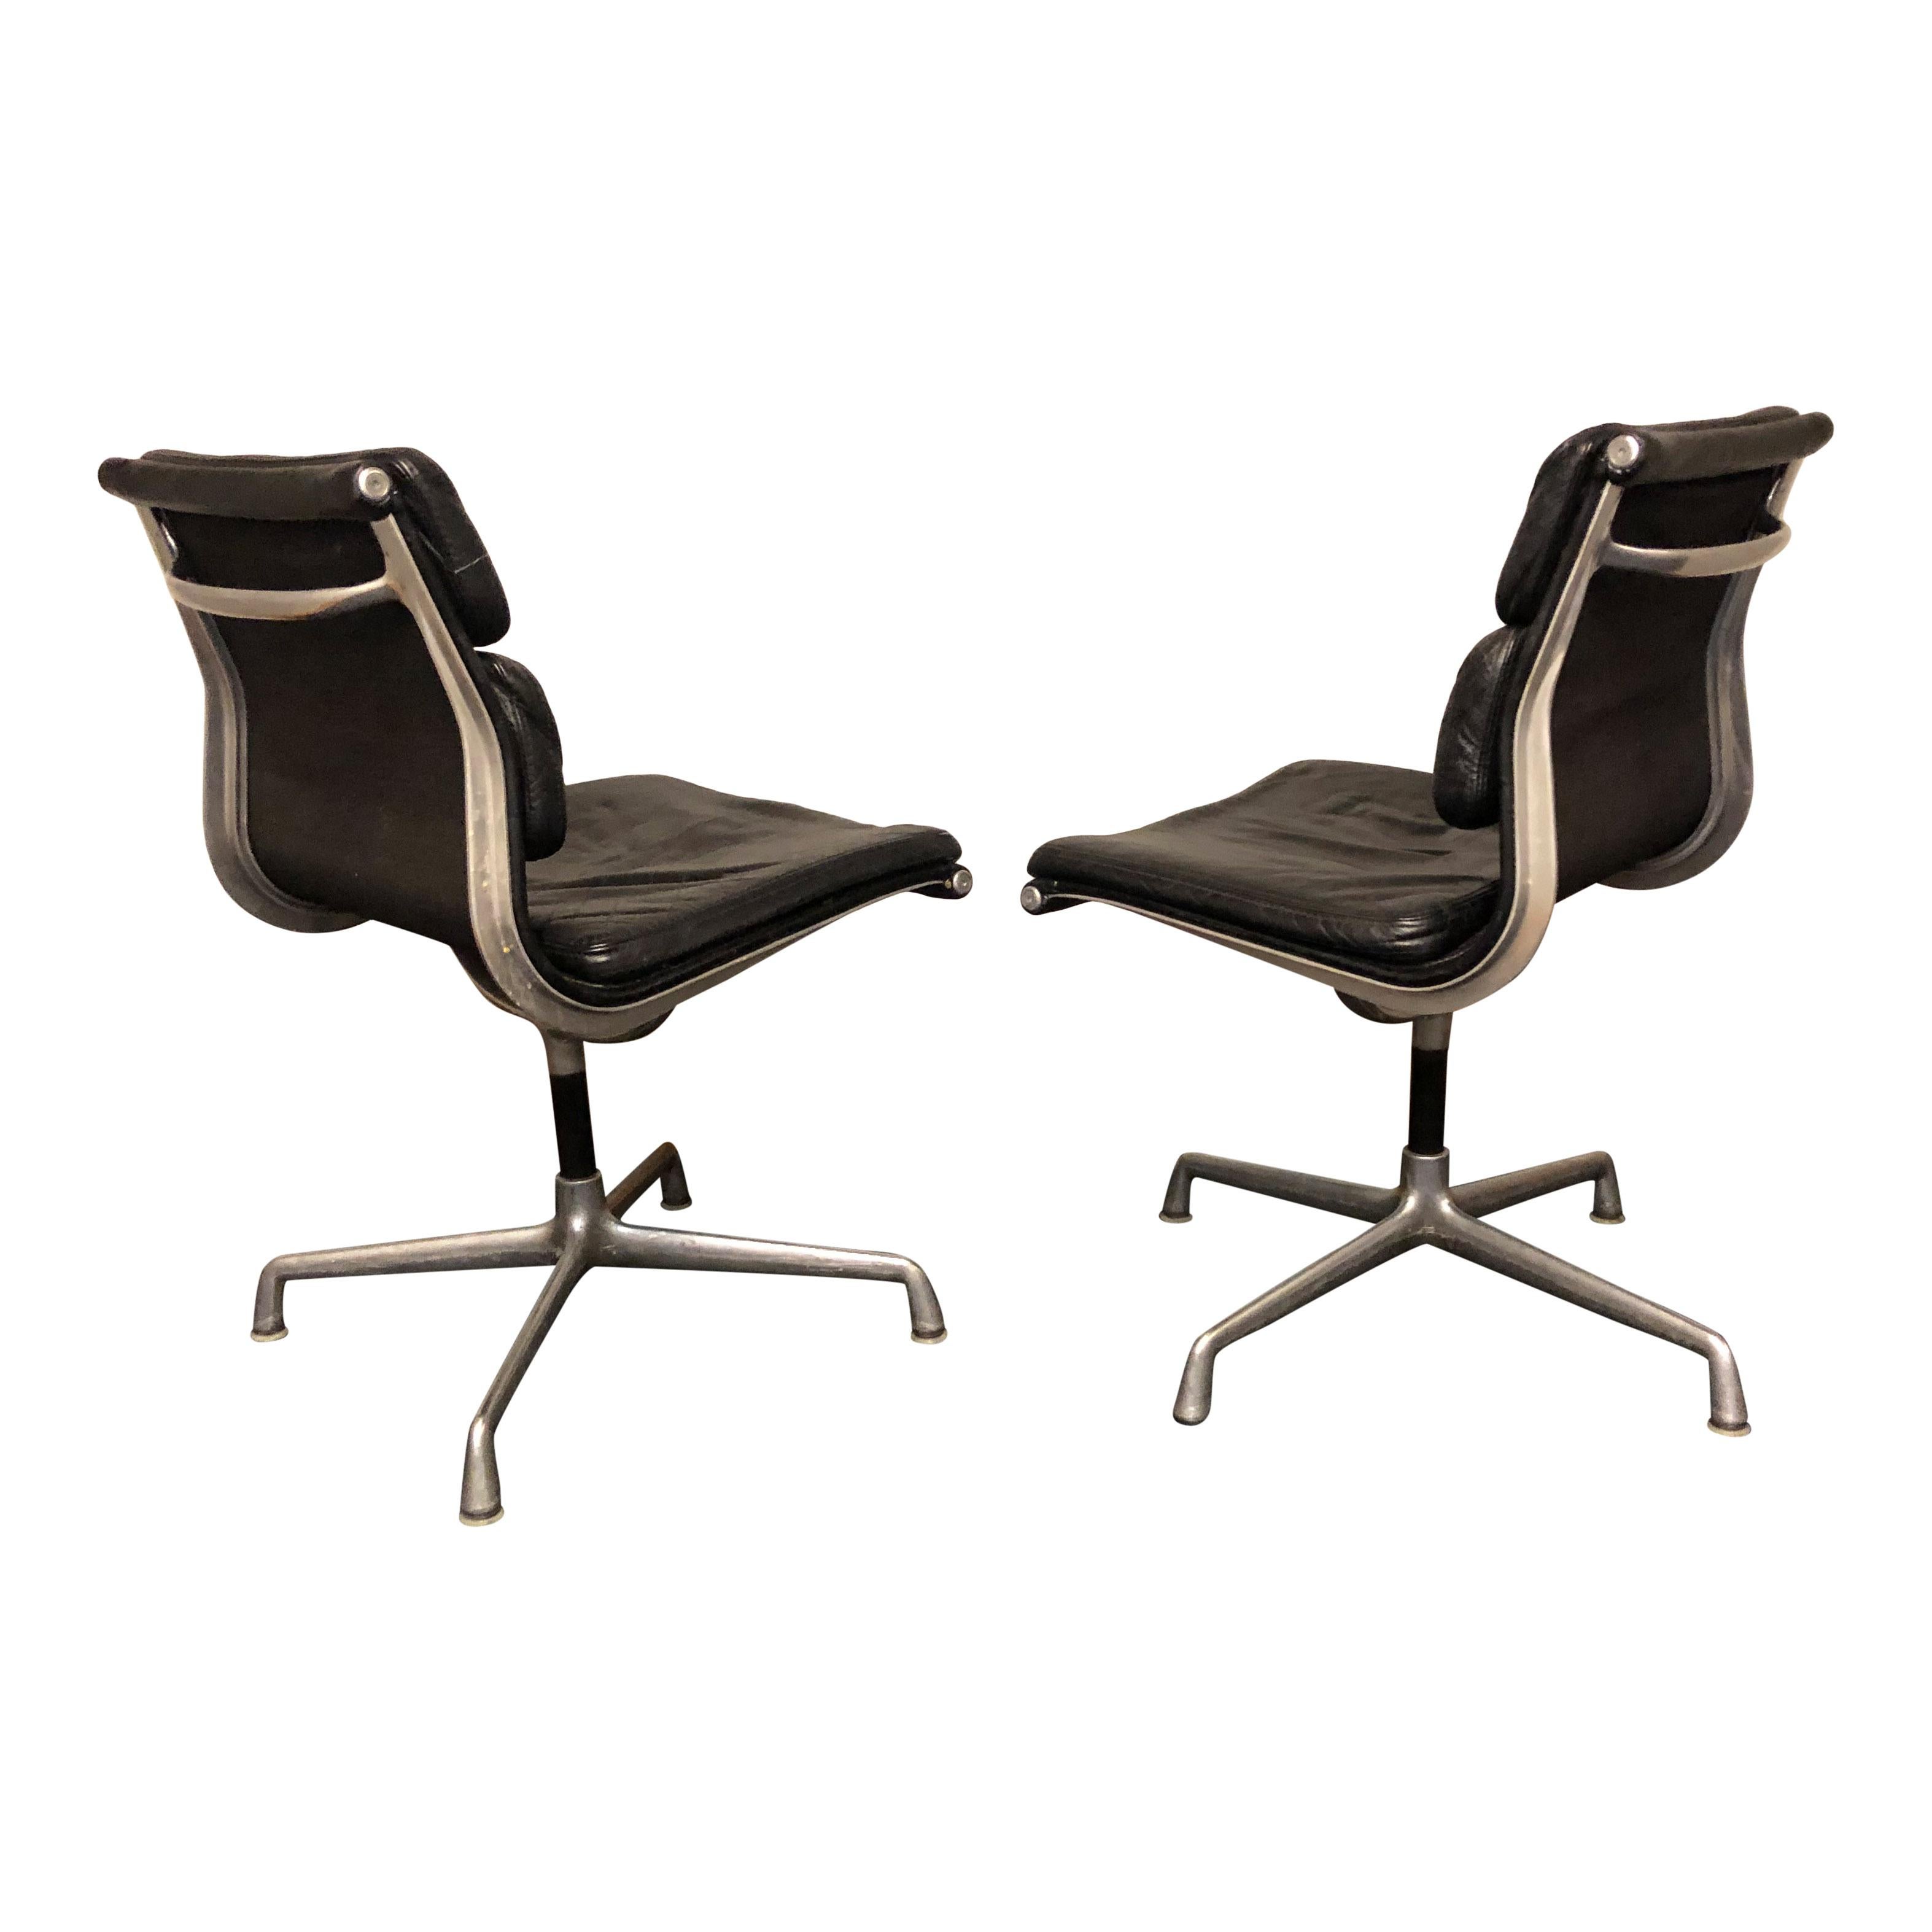 20th Century Midcentury Soft Pad Side Chairs by Eames for Herman Miller in Black Leather